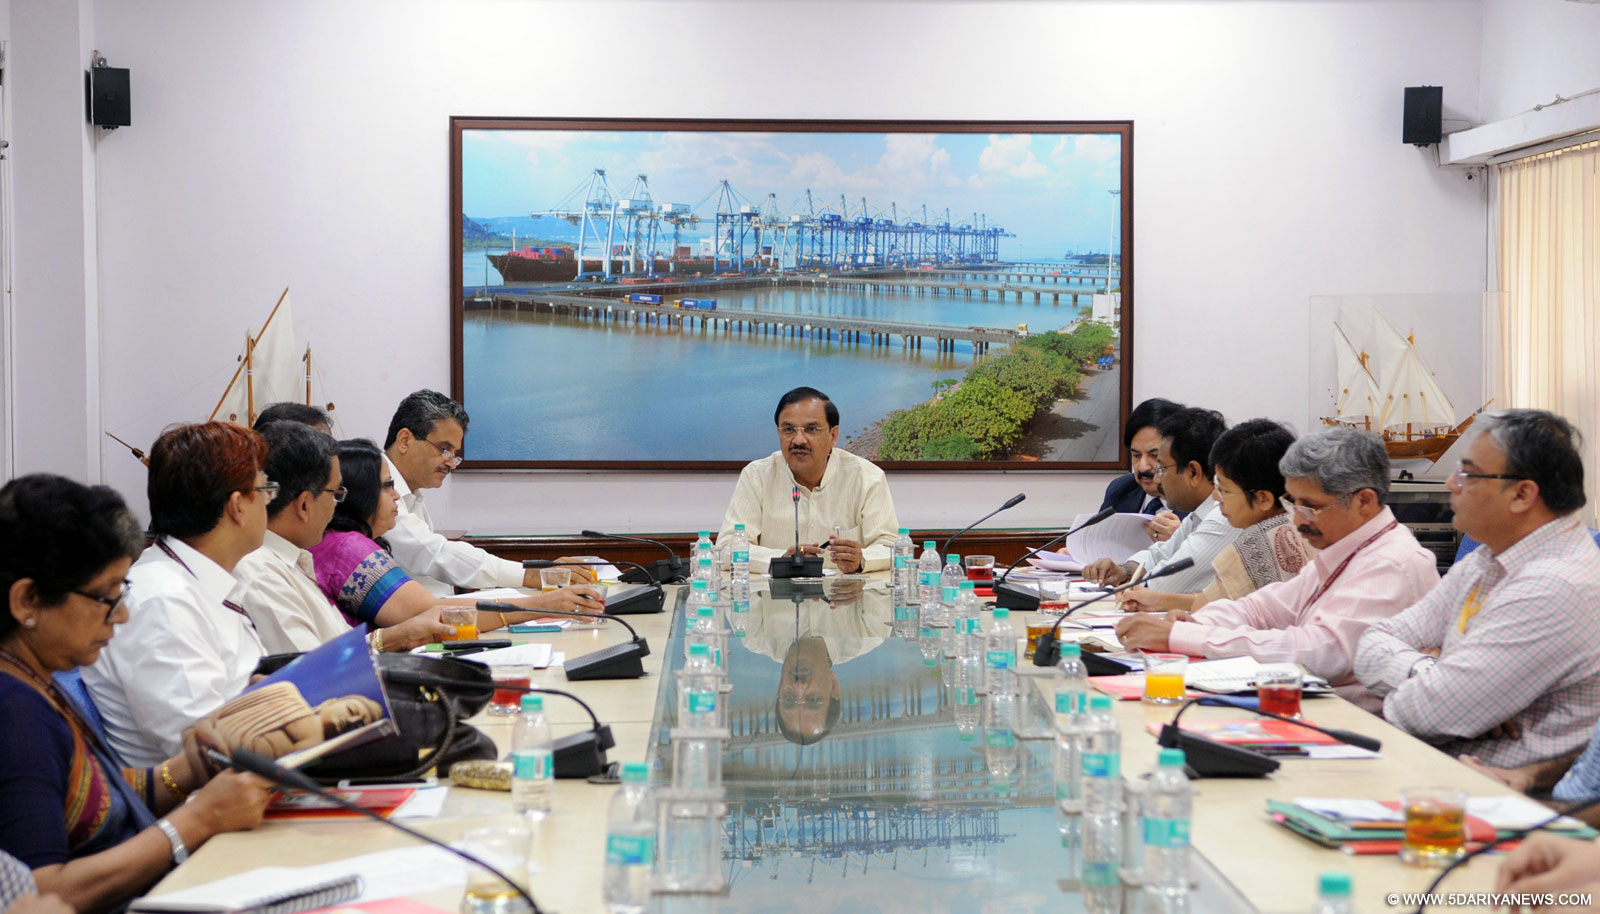 The Minister of State for Culture (Independent Charge), Tourism (Independent Charge) and Civil Aviation, Dr. Mahesh Sharma chairing the meeting of the National Steering Committee (NSC) of Mission Directorate on Swadesh Darshan, in New Delhi on September 24, 2015. The Secretary of Tourism, Shri Vinod Zutshi is also seen.